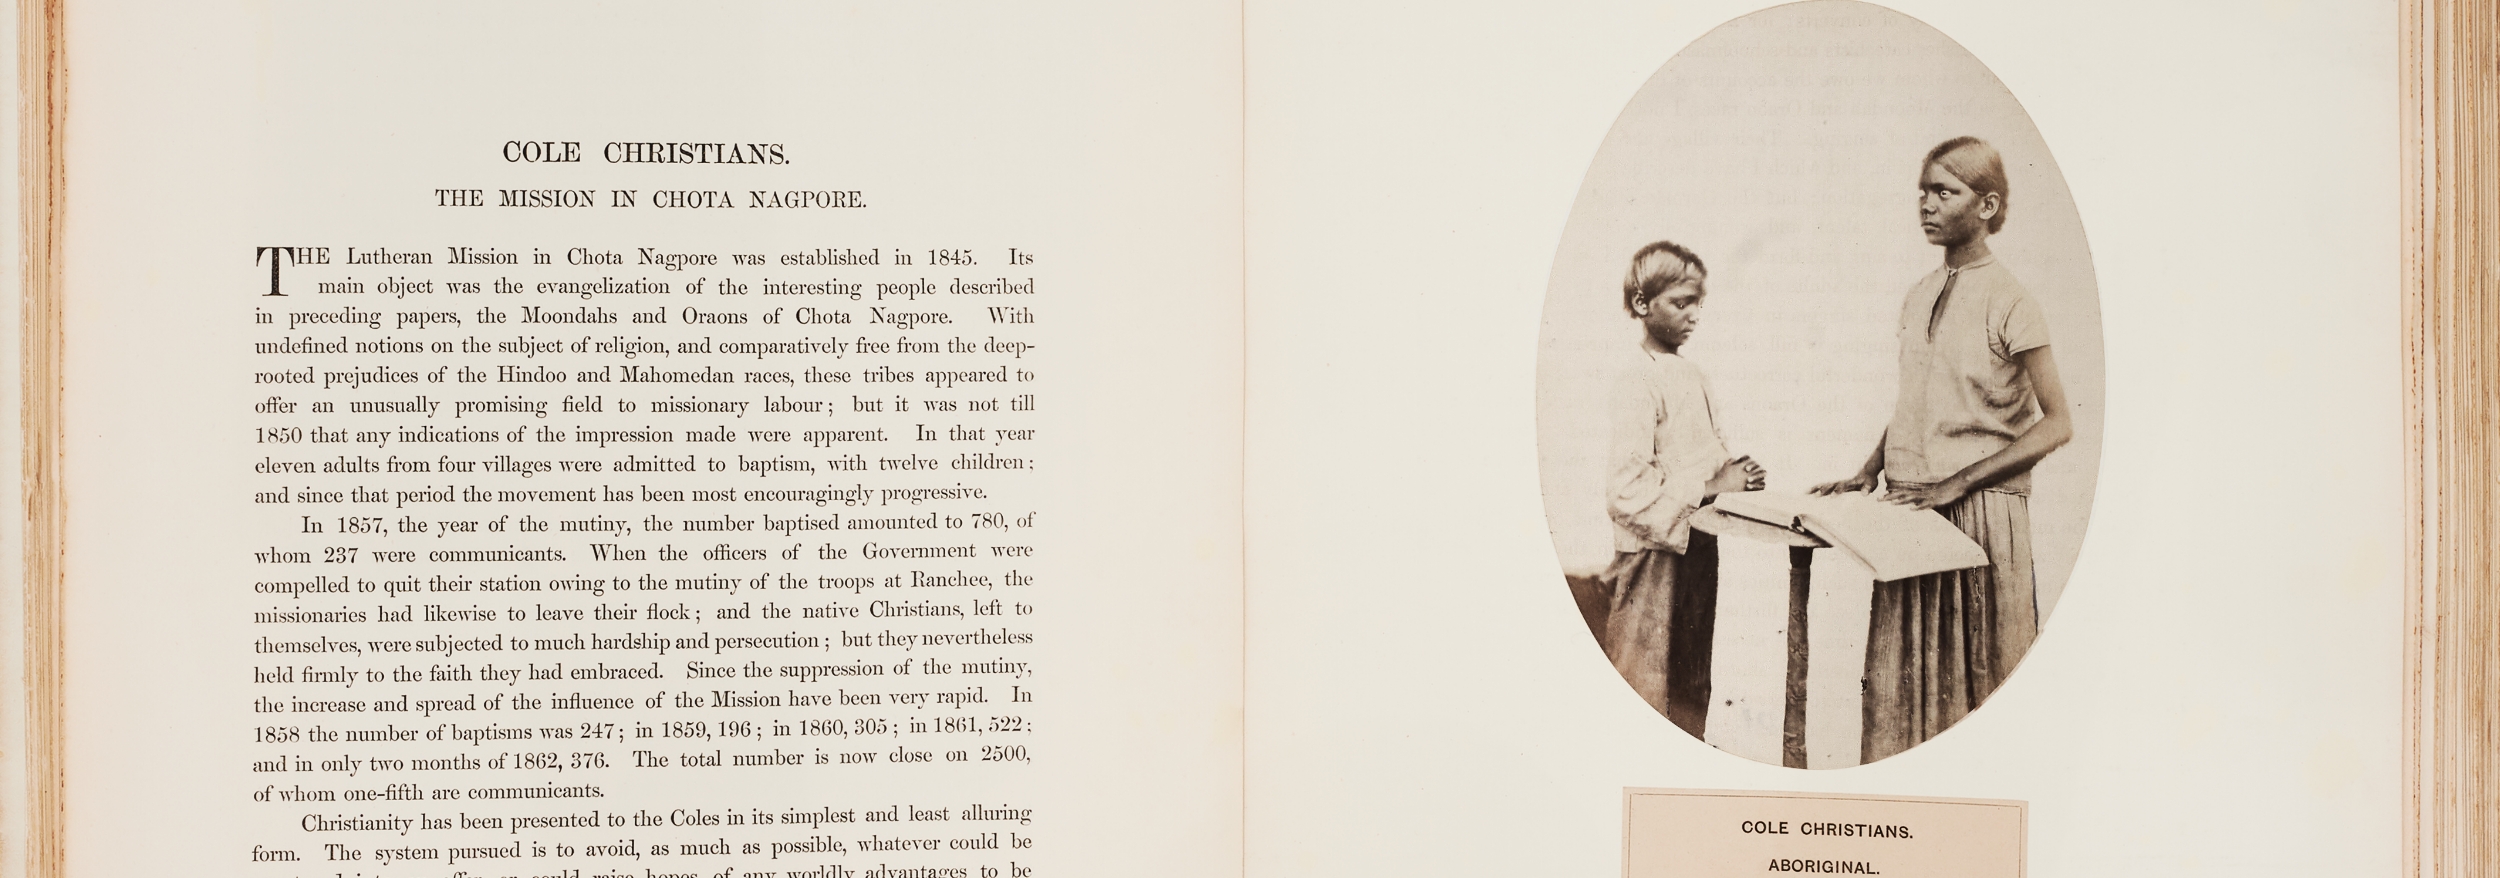 Two pages, with text on the left and a photograph on the right of two individuals and label: “Cole Christians. Aboriginal.”